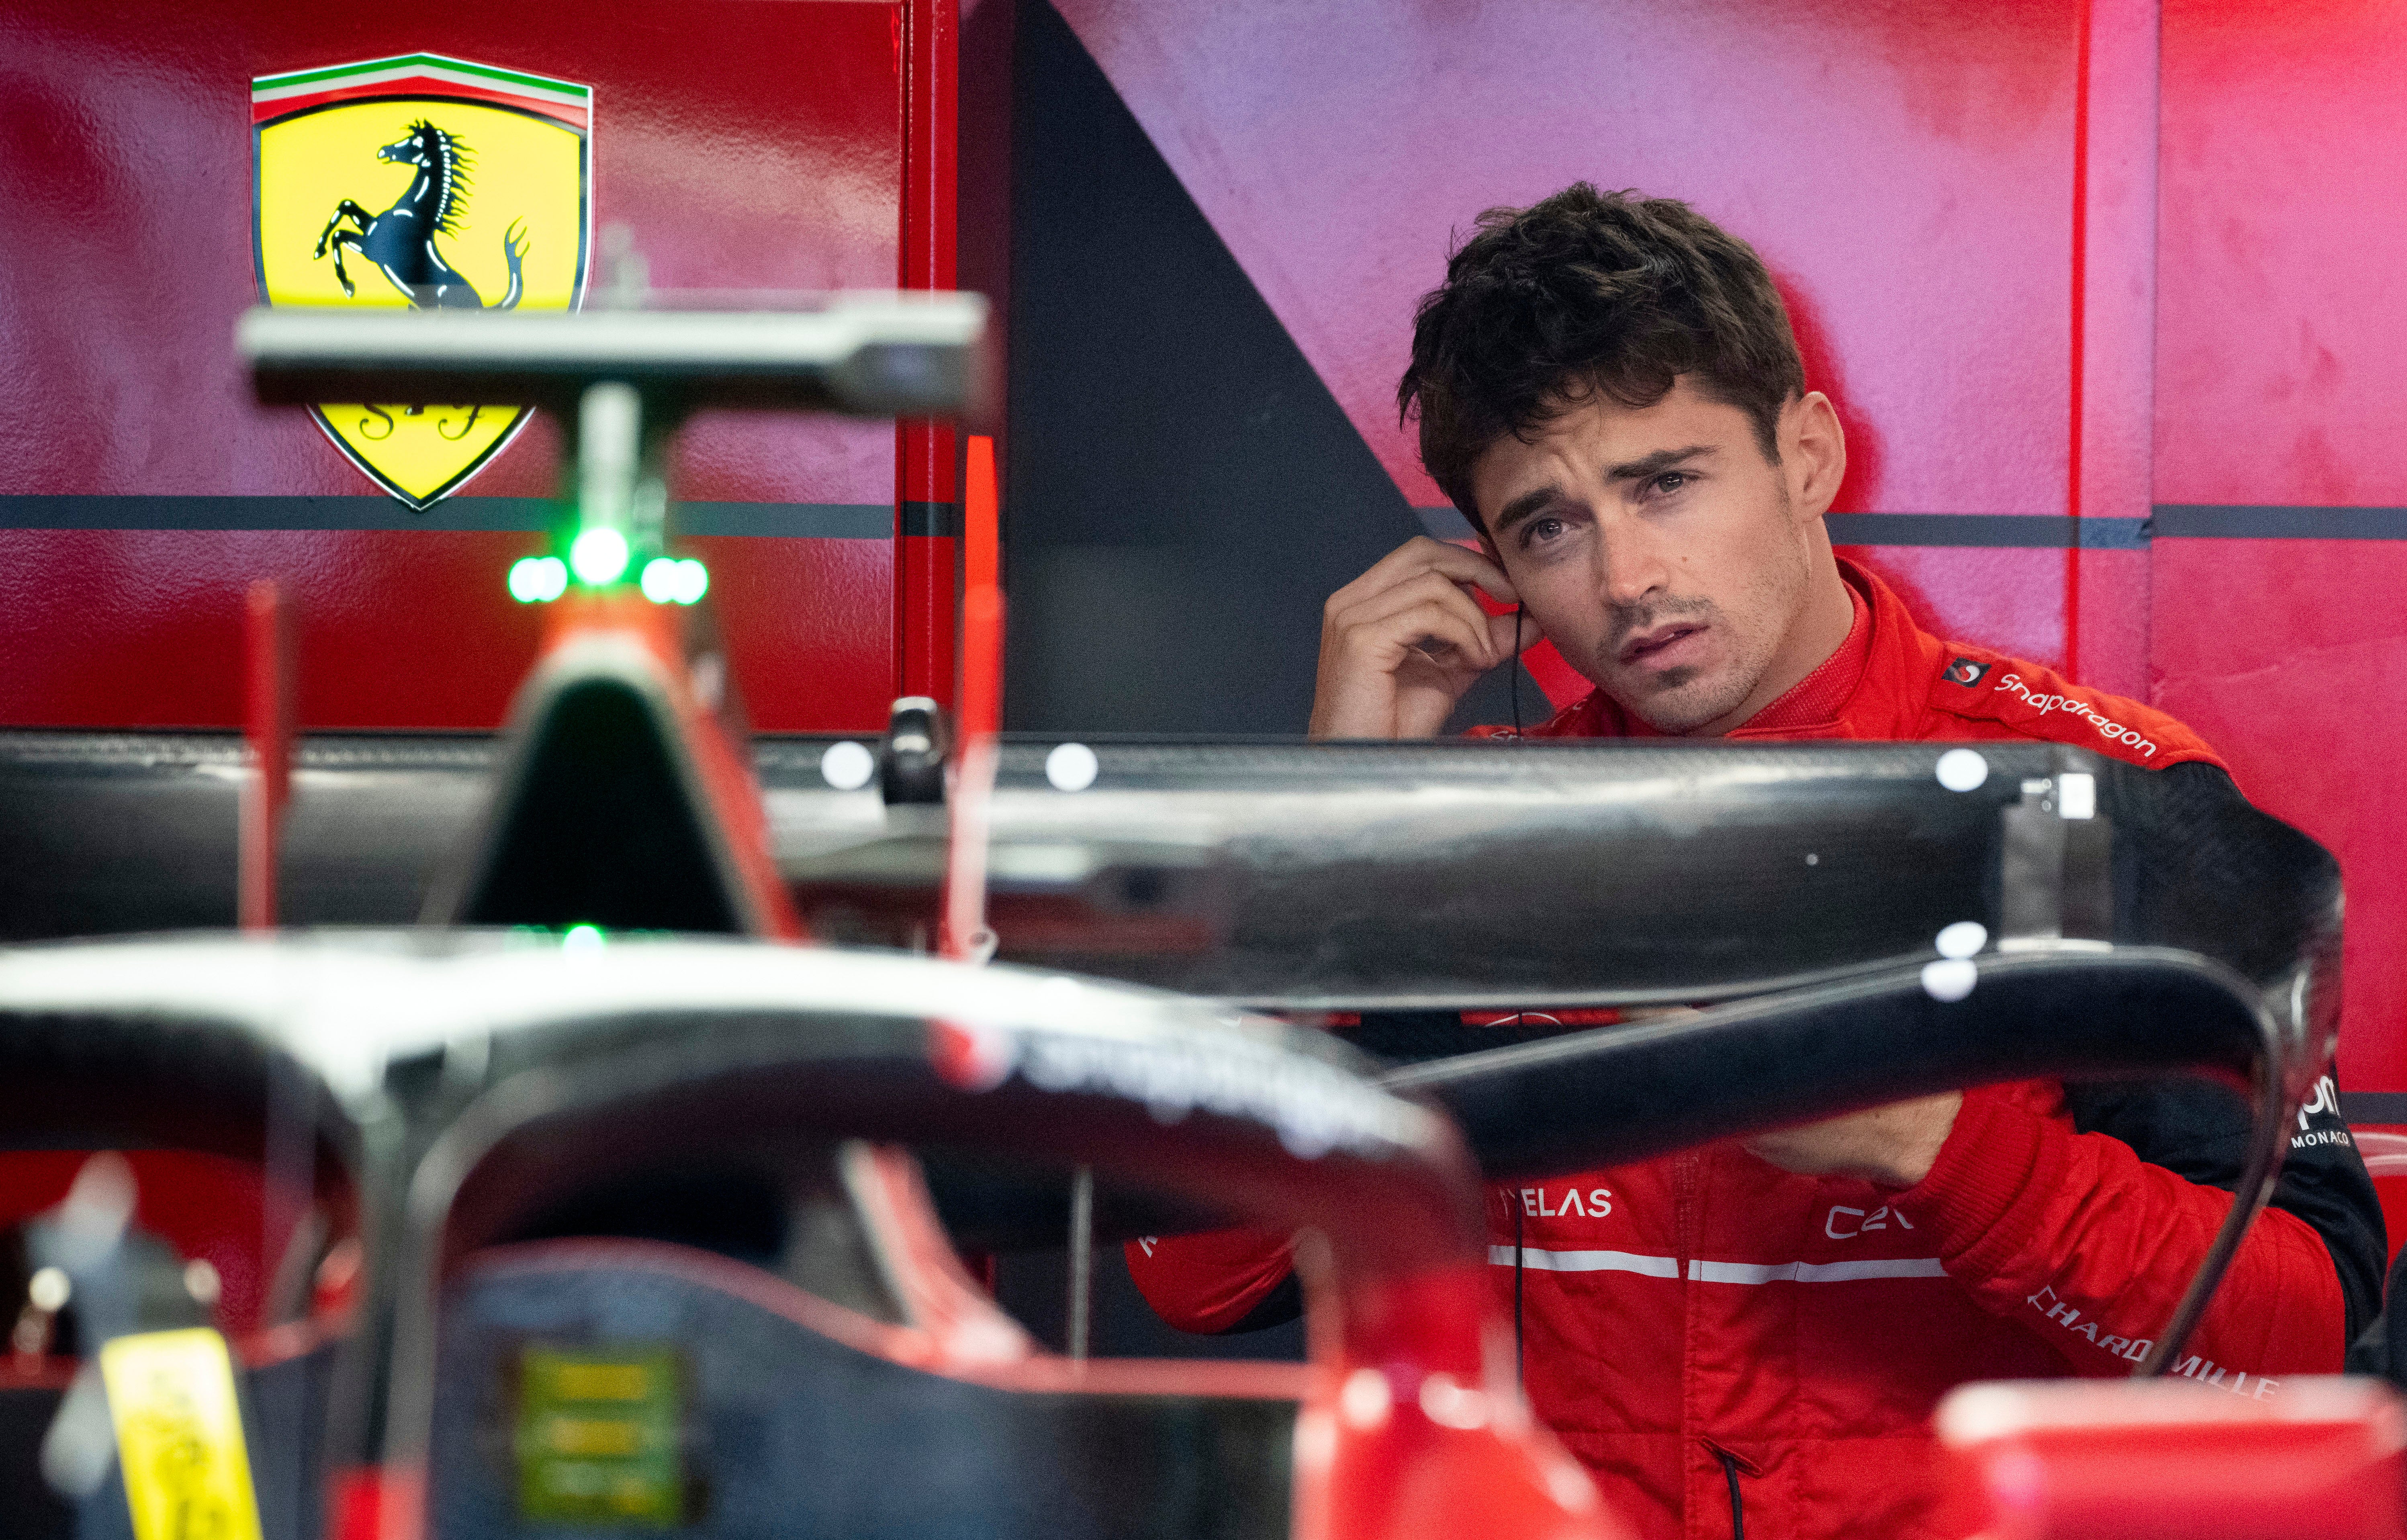 Charles Leclerc was forced to start at the back in Canada following engine penalties (Paul Chiasson/AP)